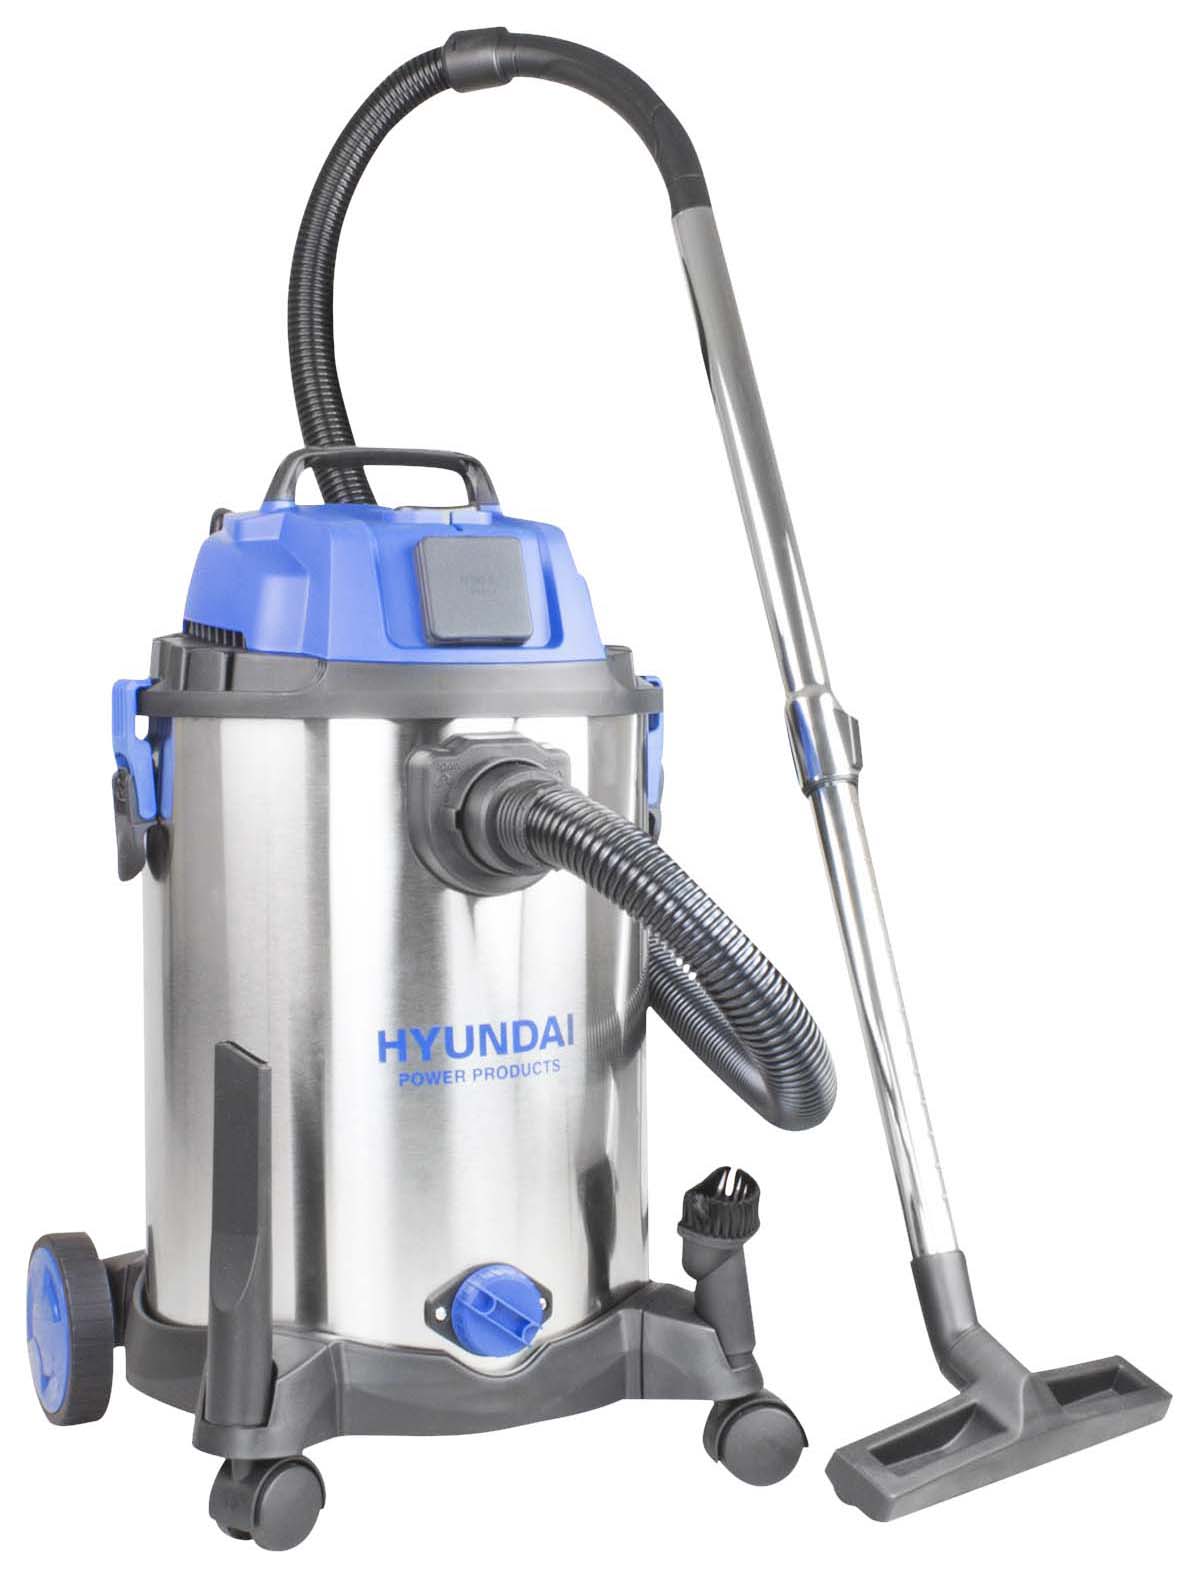 Image of Hyundai HYVI3014 30L Wet & Dry Industrial Vacuum with Power Take Off - 1400W